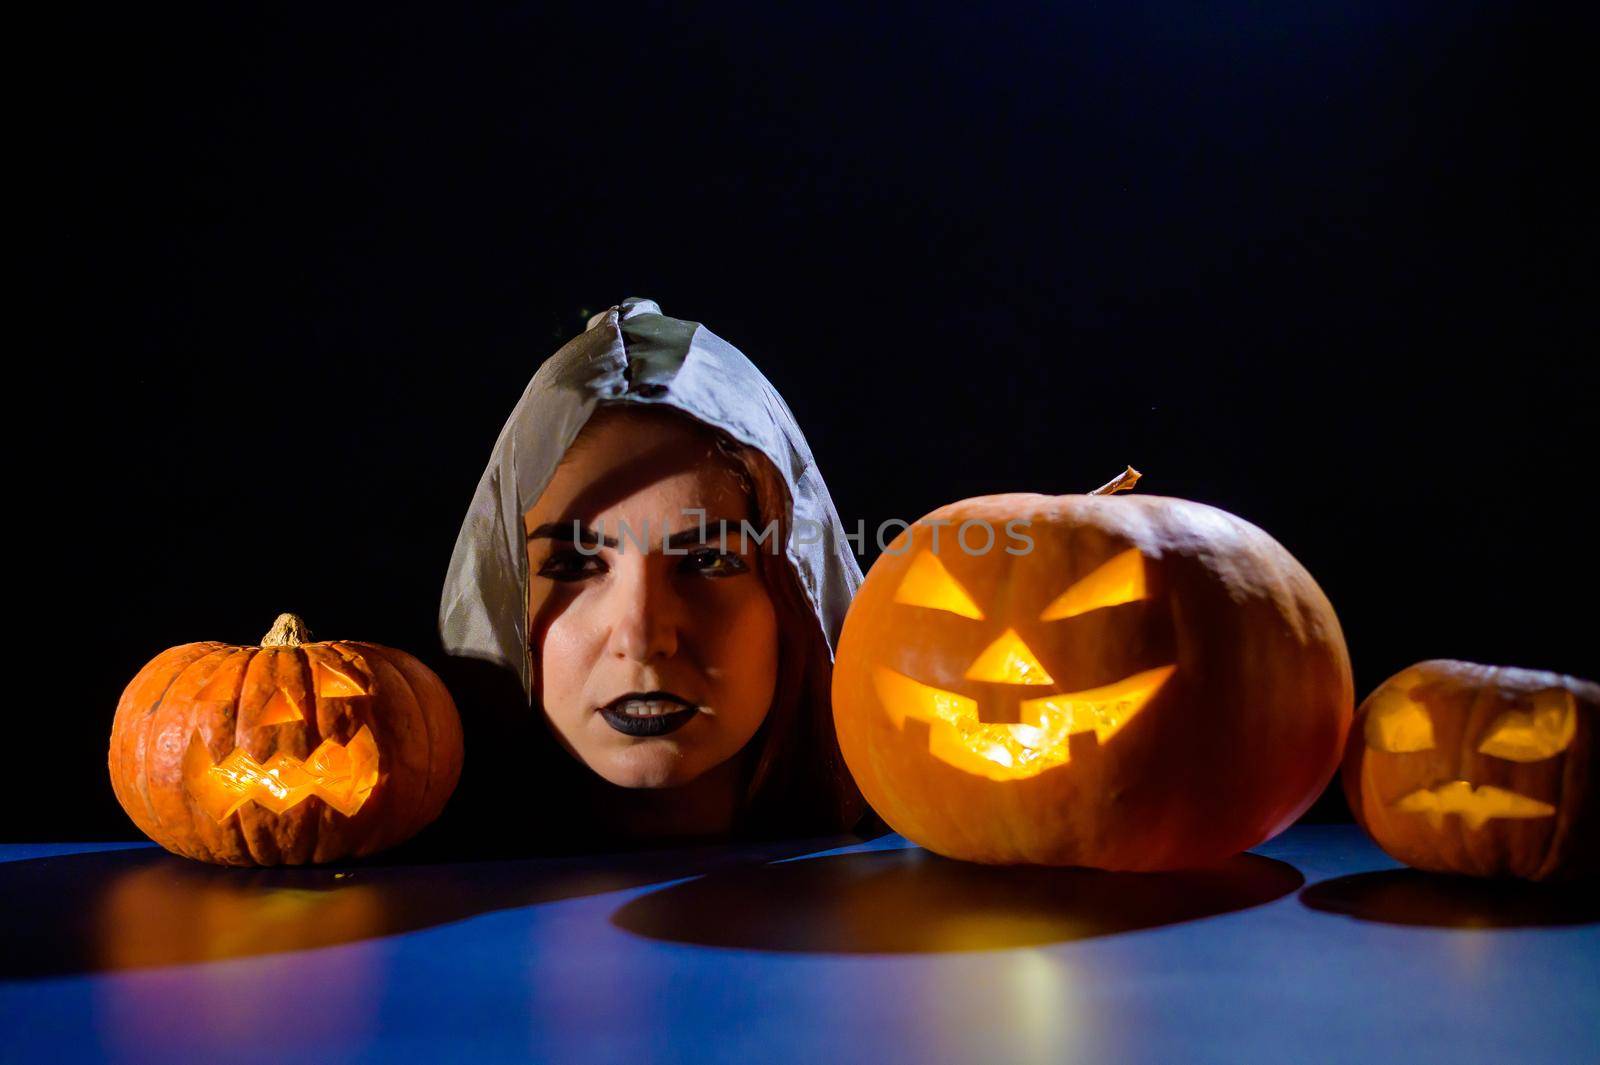 The evil witch casts a spell on pumpkins. Portrait of a woman in a carnival halloween costume in the dark.